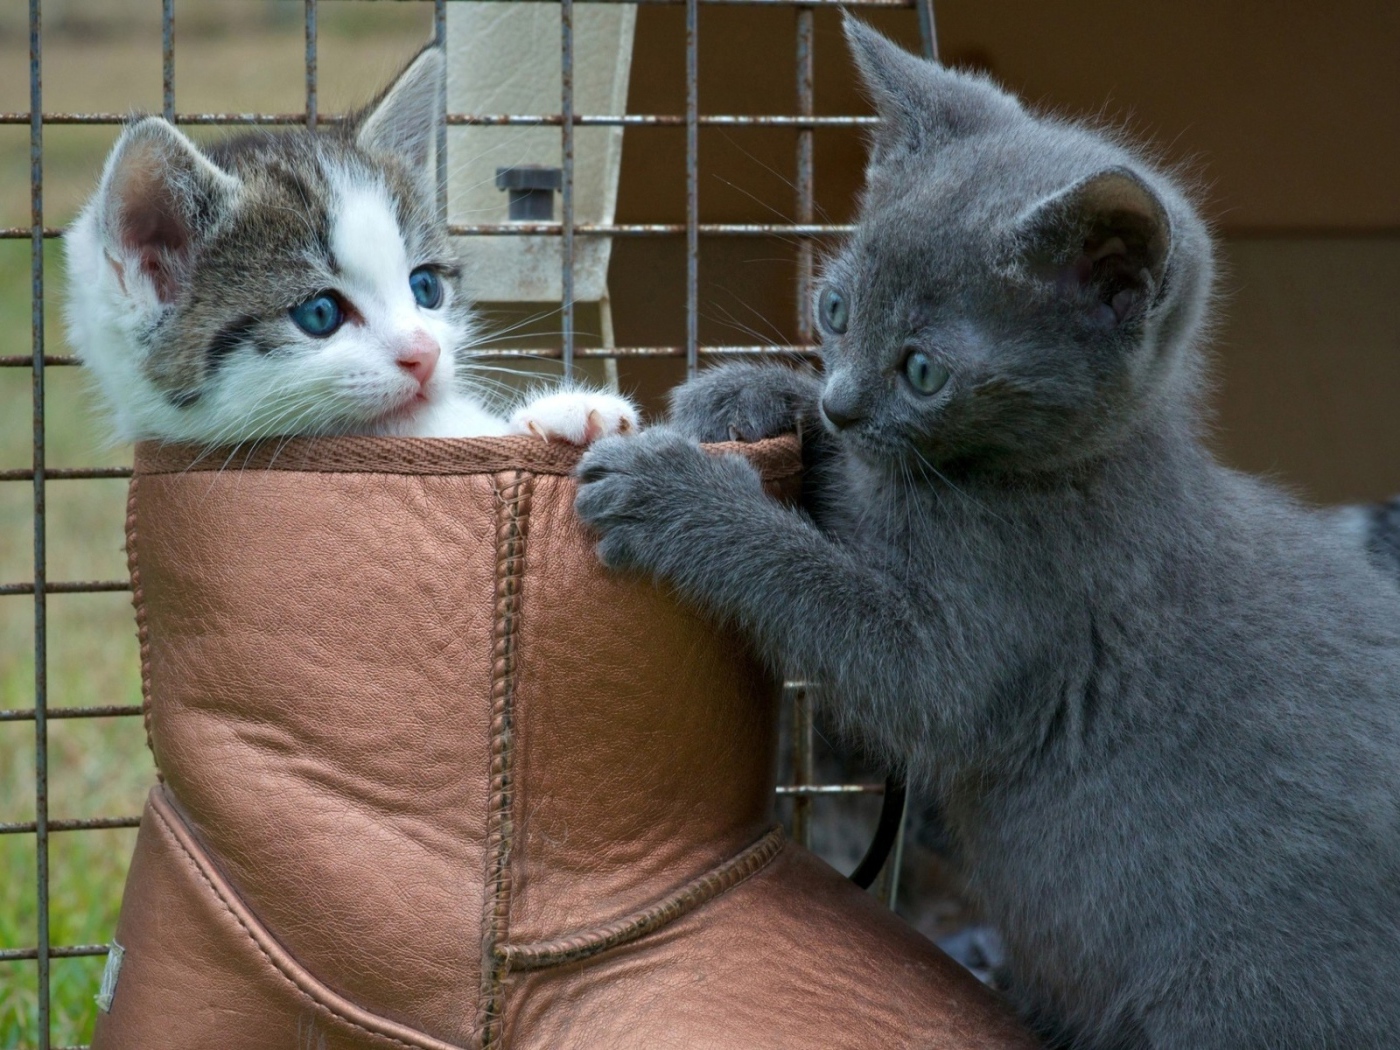 Two kitten playing in the boot